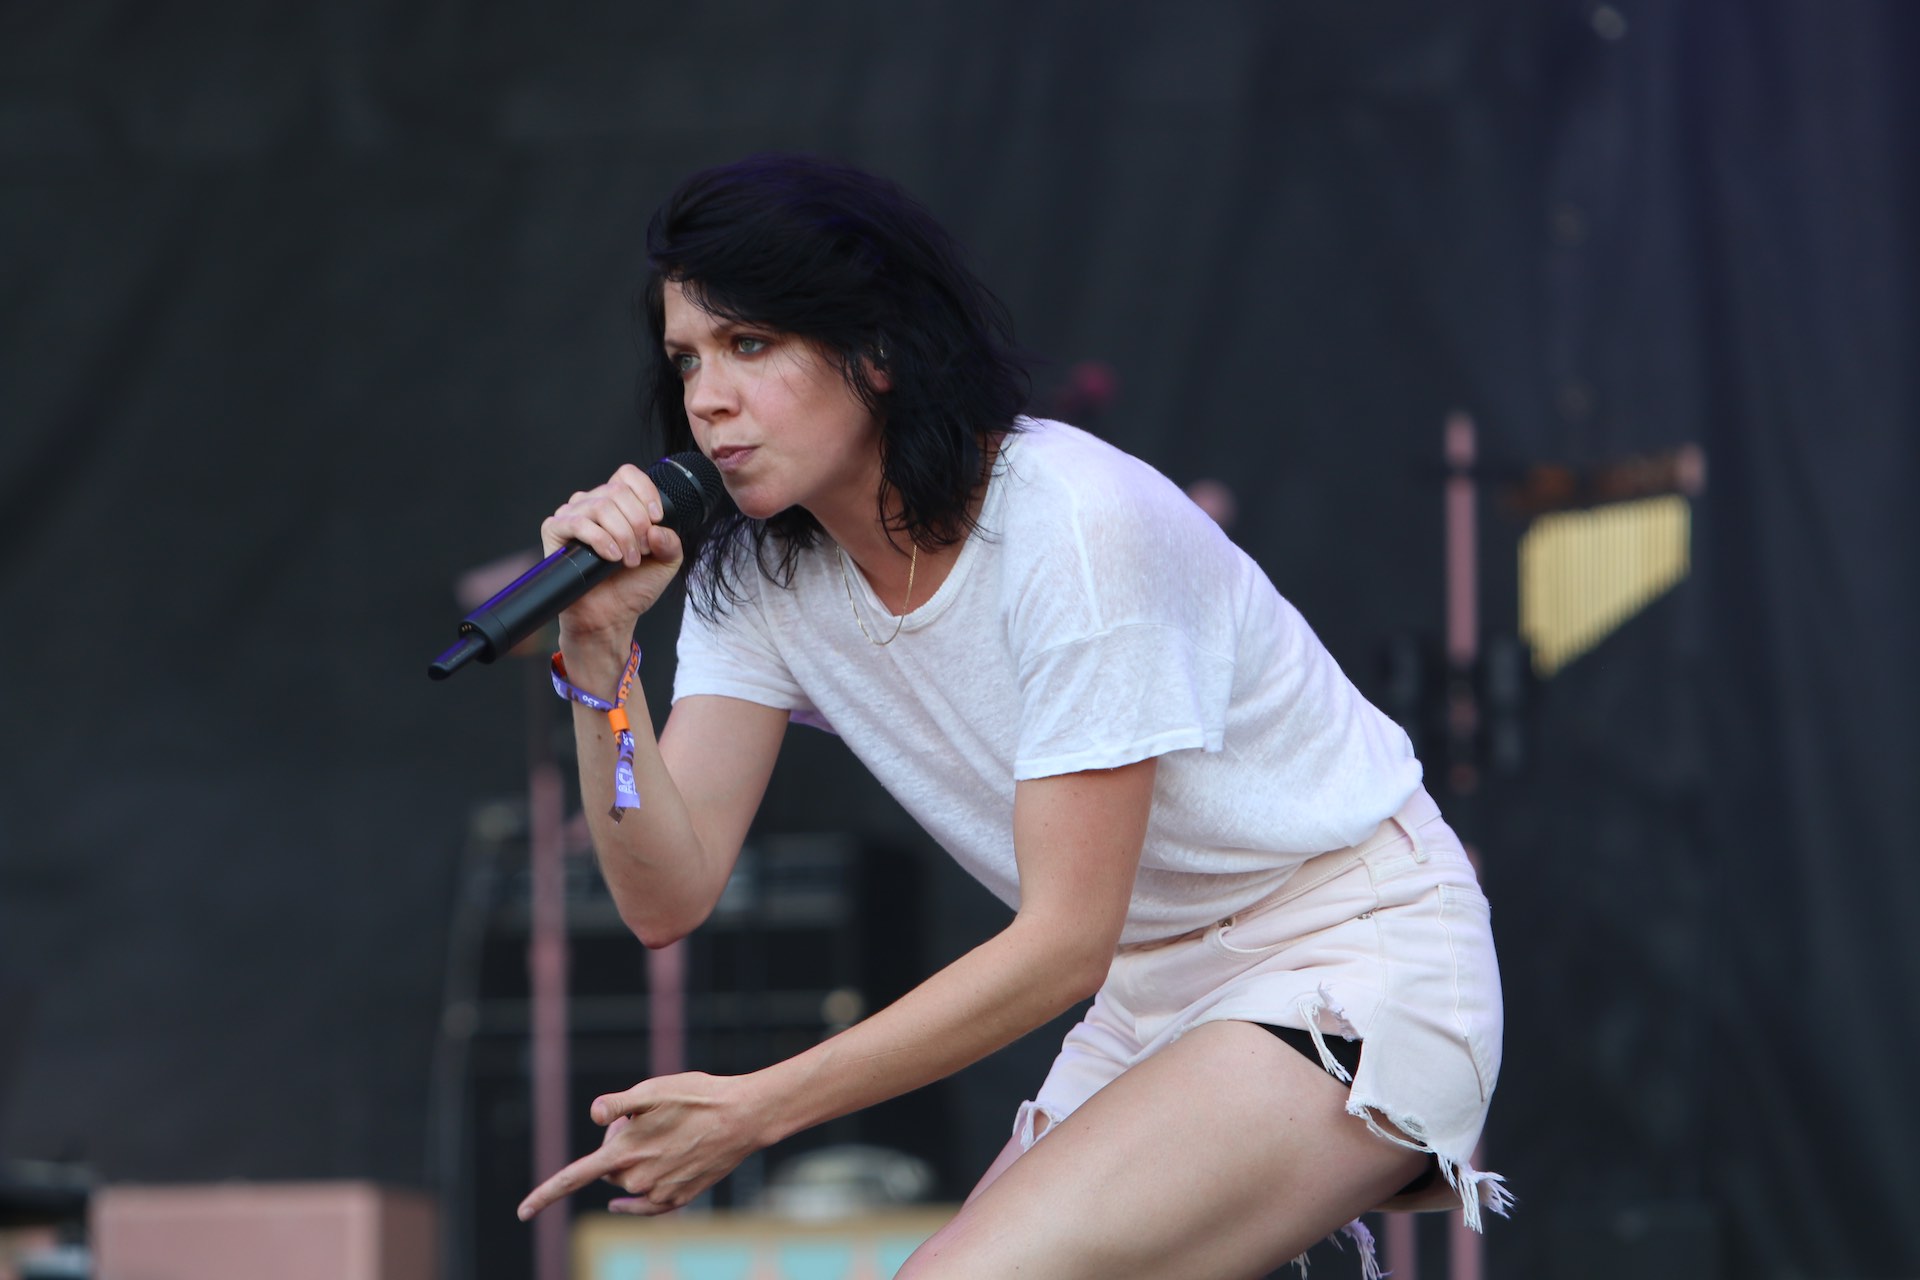 VIDEO INTERVIEW K Flay At Austin City Limits 2019 B Sides